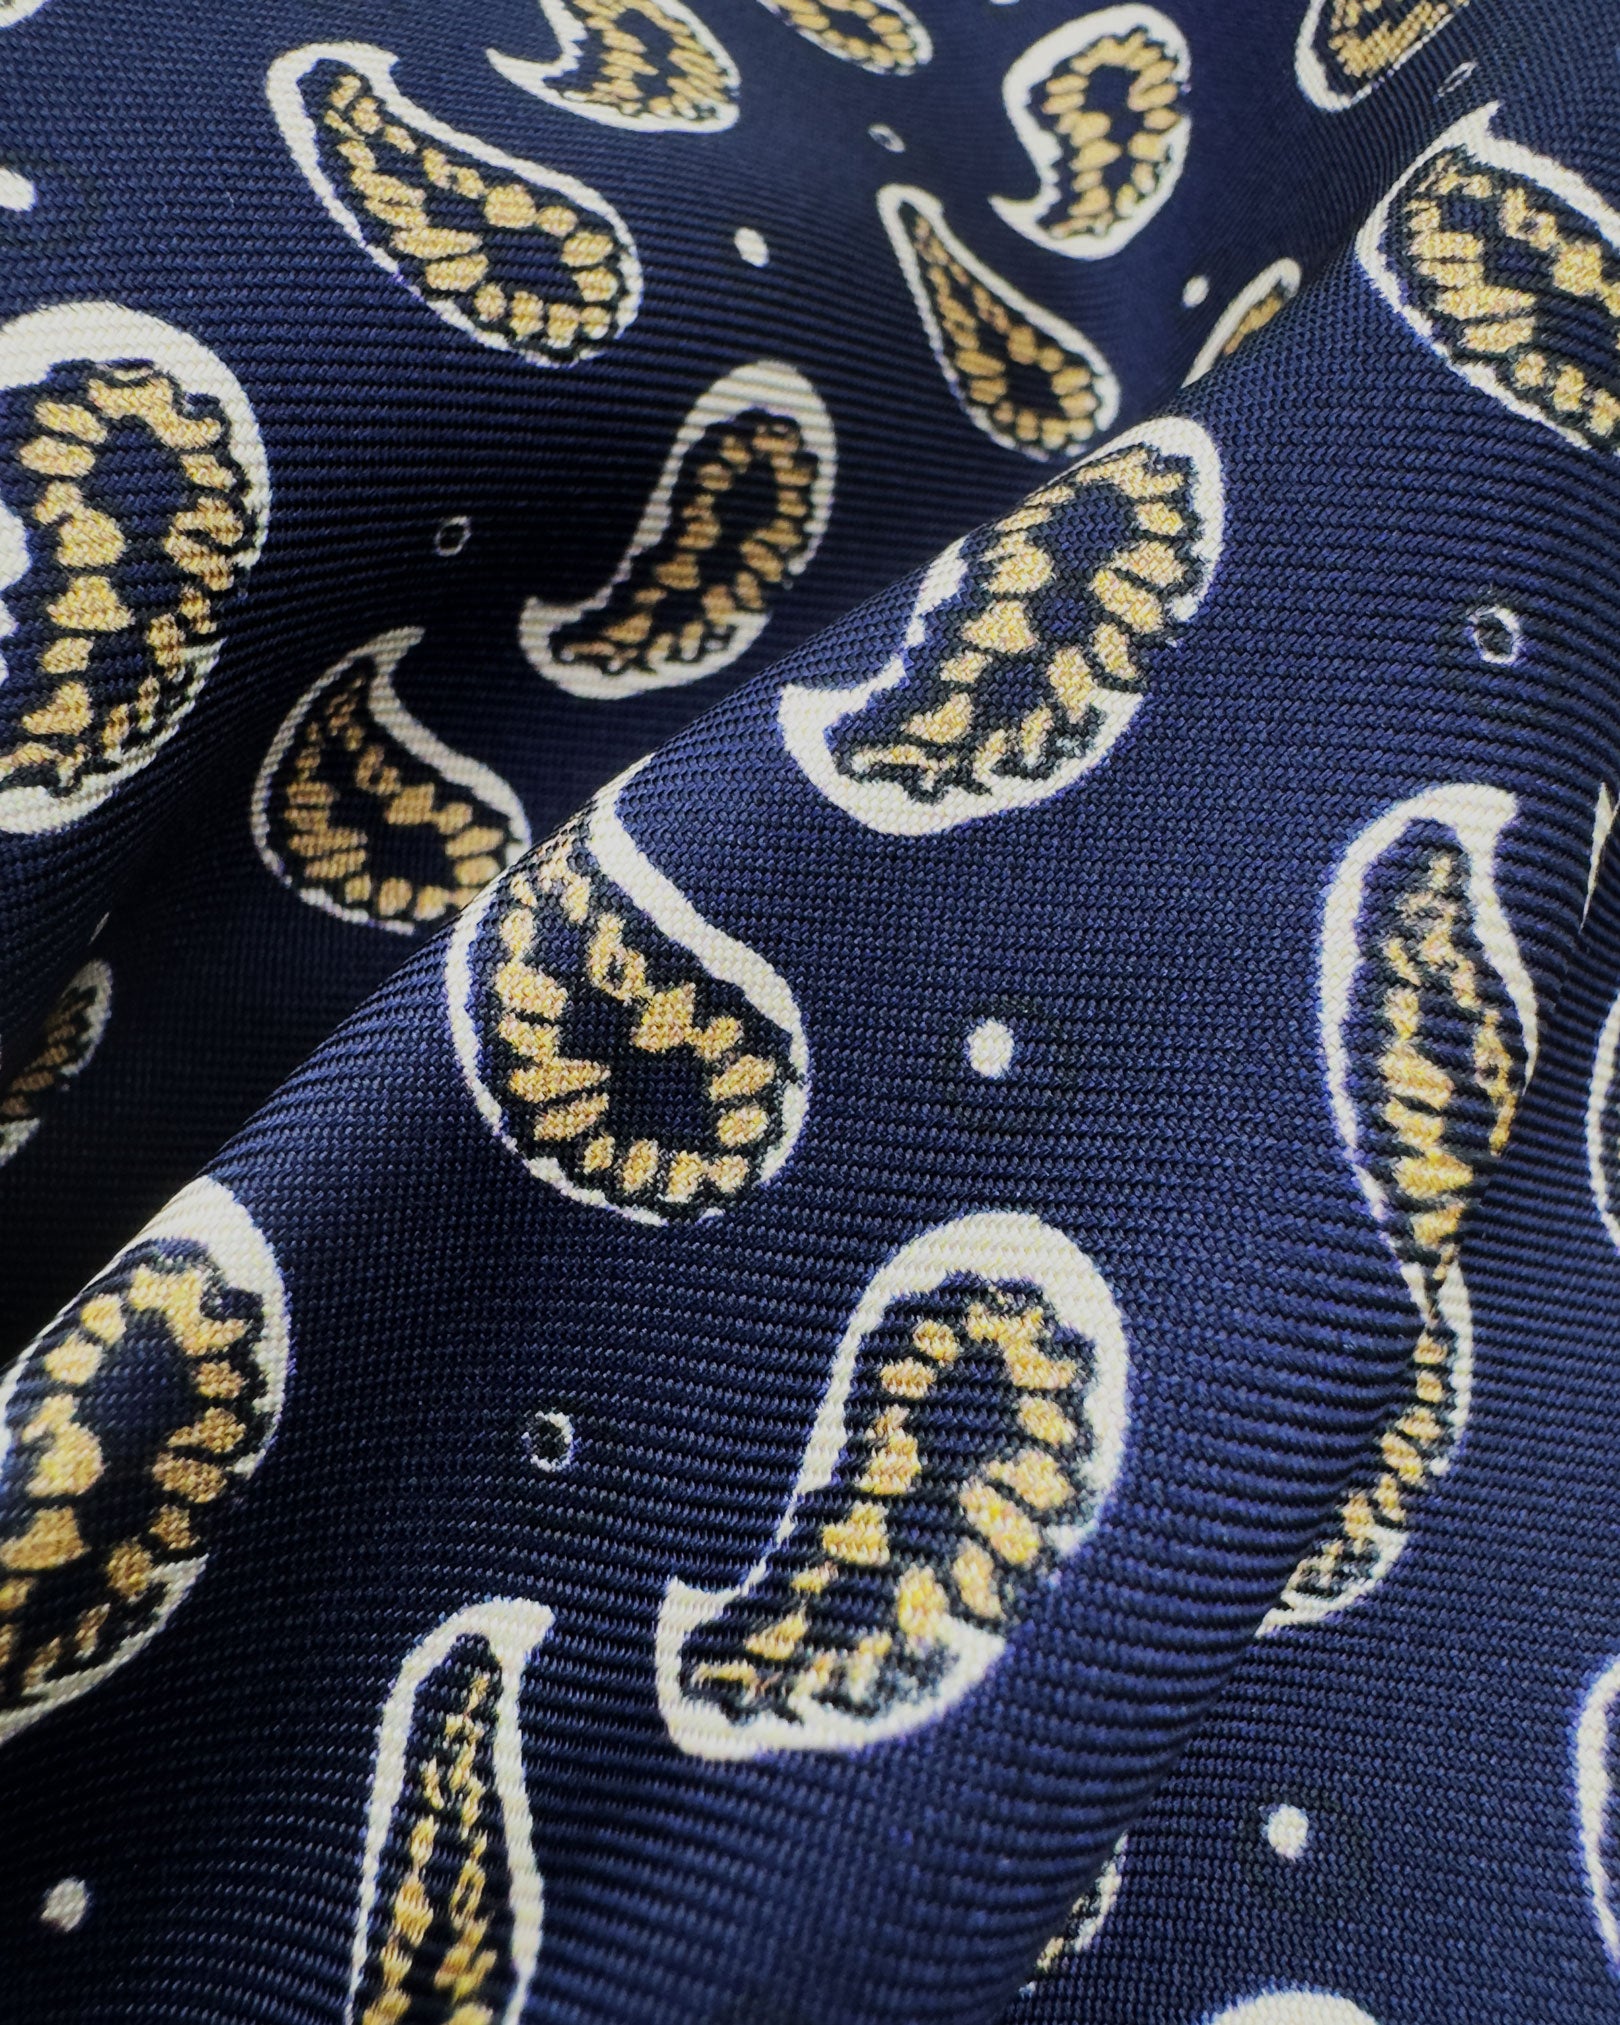 A ruffled close-up of the 'Hadrian' pocket square, presenting a closer view of the stylised paisley patterns in yellow and white against the attractive lustre of the deadstock silk material. 